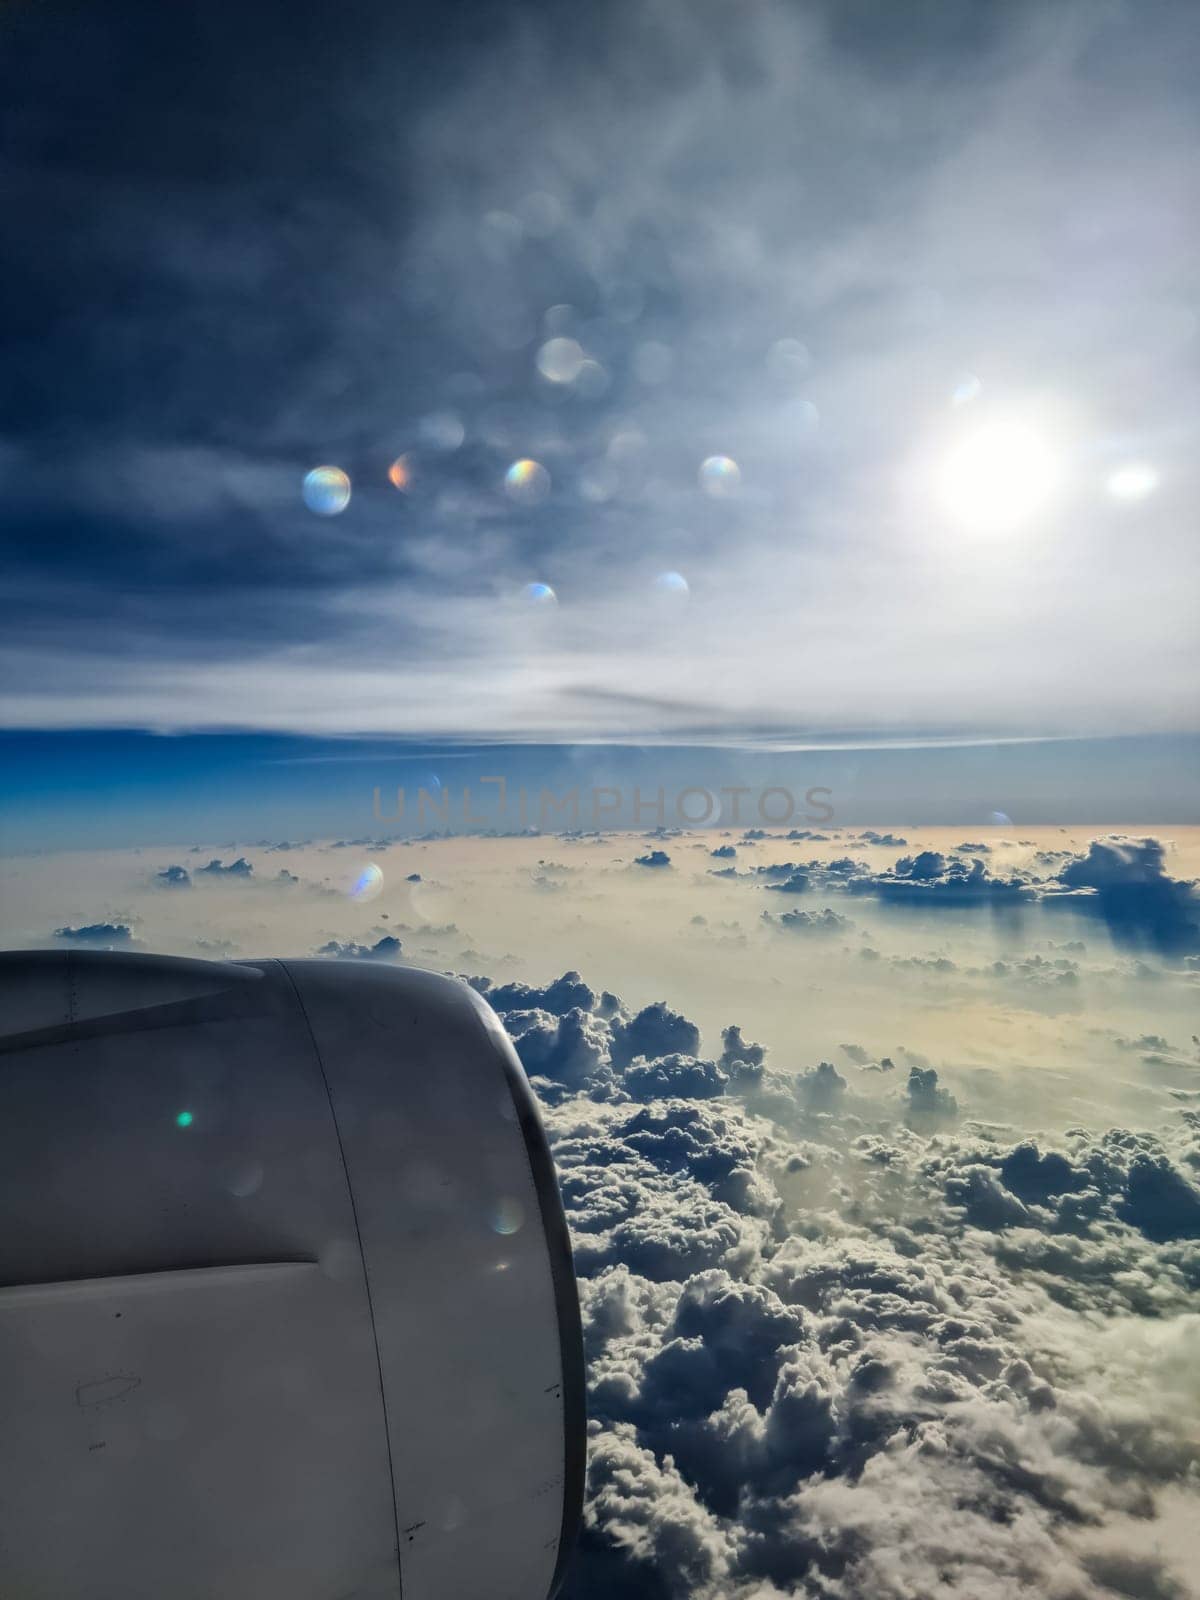 View from an airplane window of the sun and great cloud formations with many small spots on the window